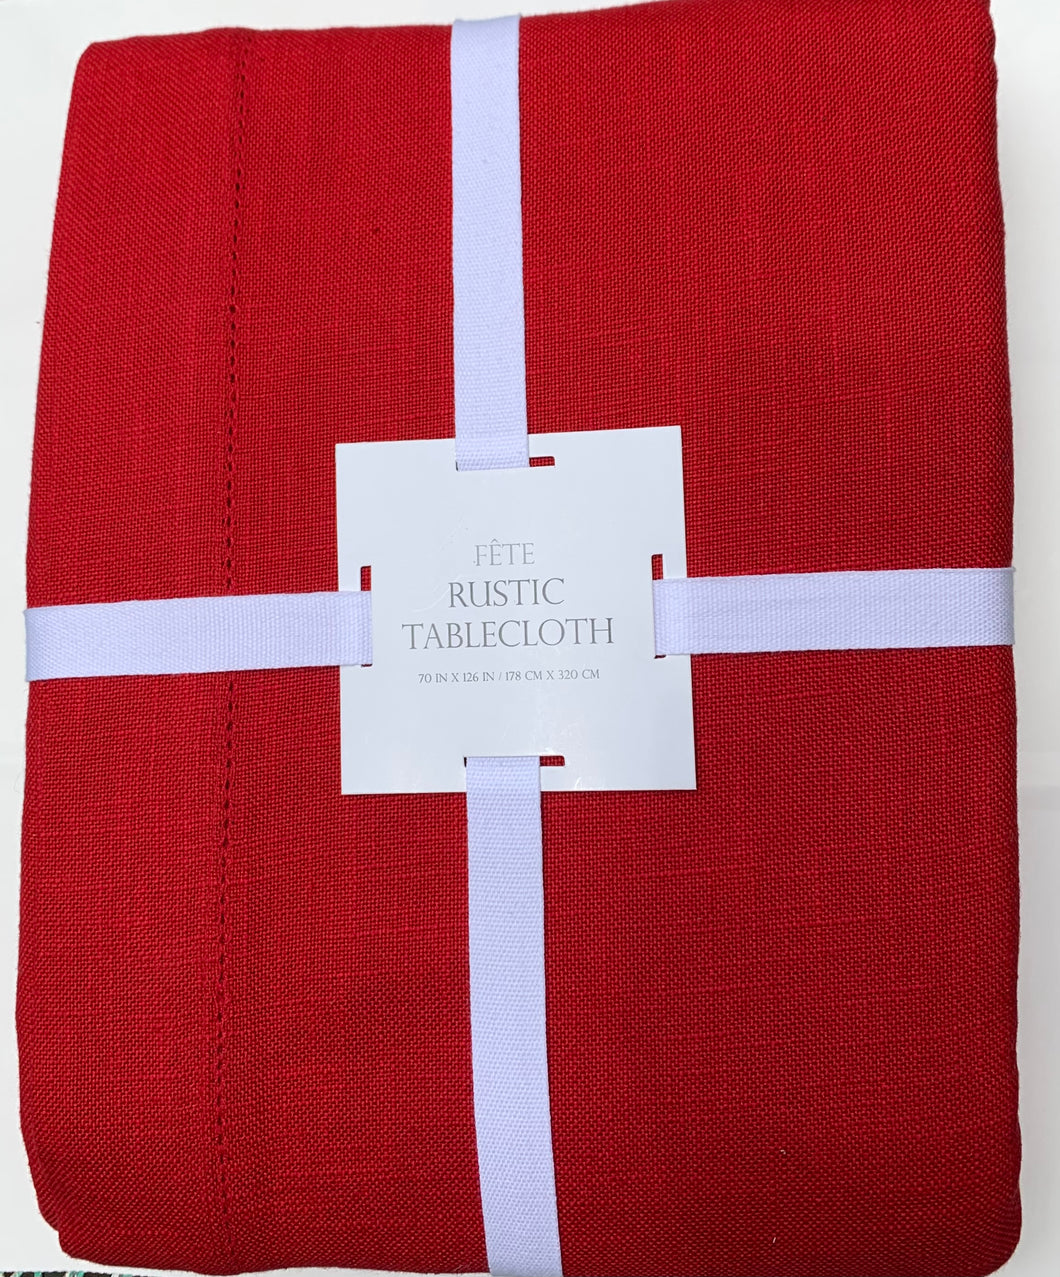 Fête Rustic Tablecloth - Red